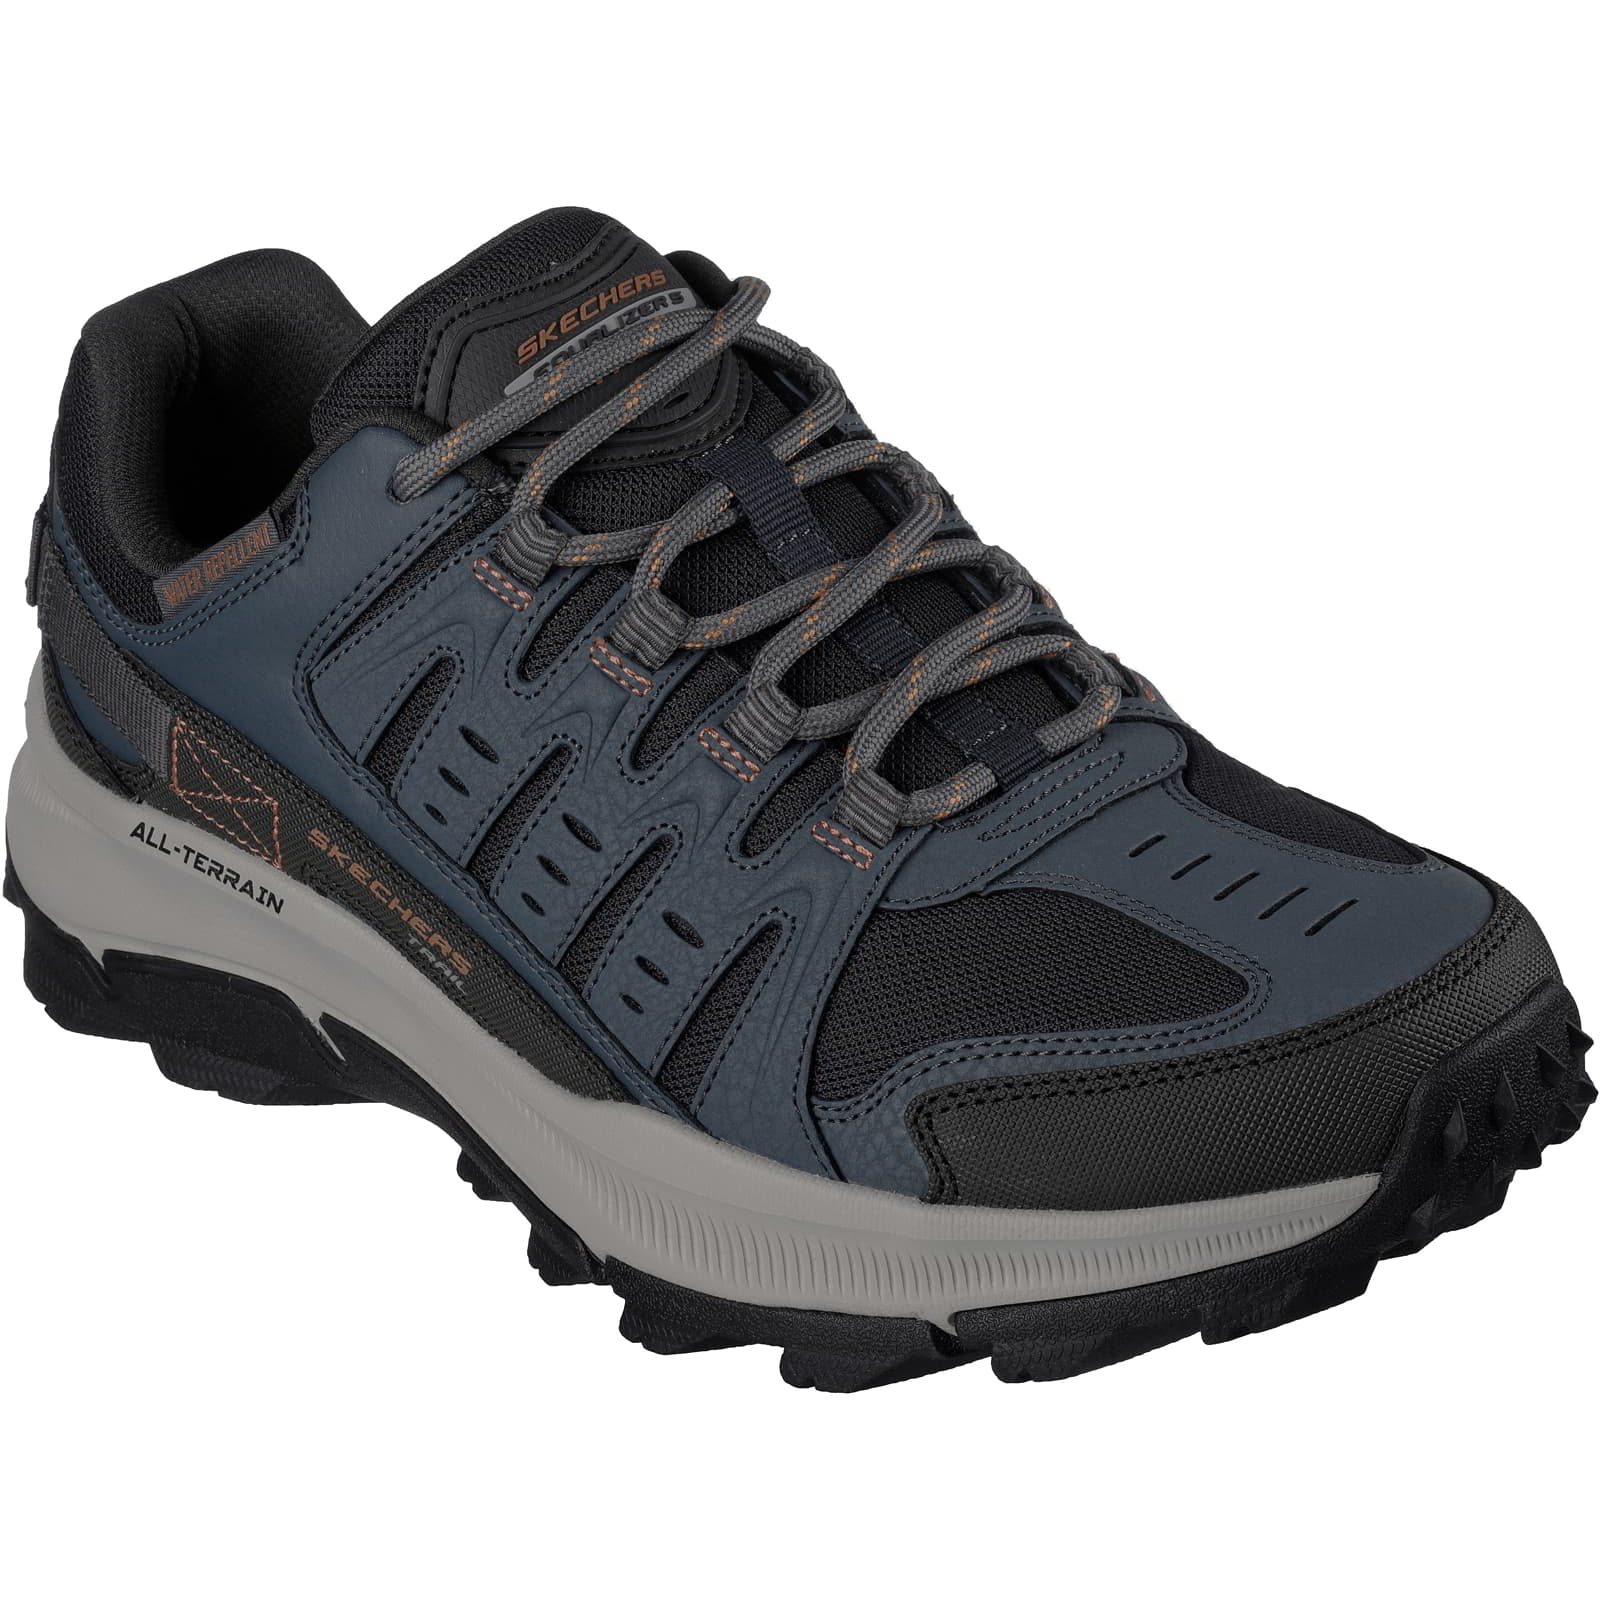 Skechers Men's Equalizer 5.0 Trail Water Repellent Walking Shoes Trainers - UK 9.5